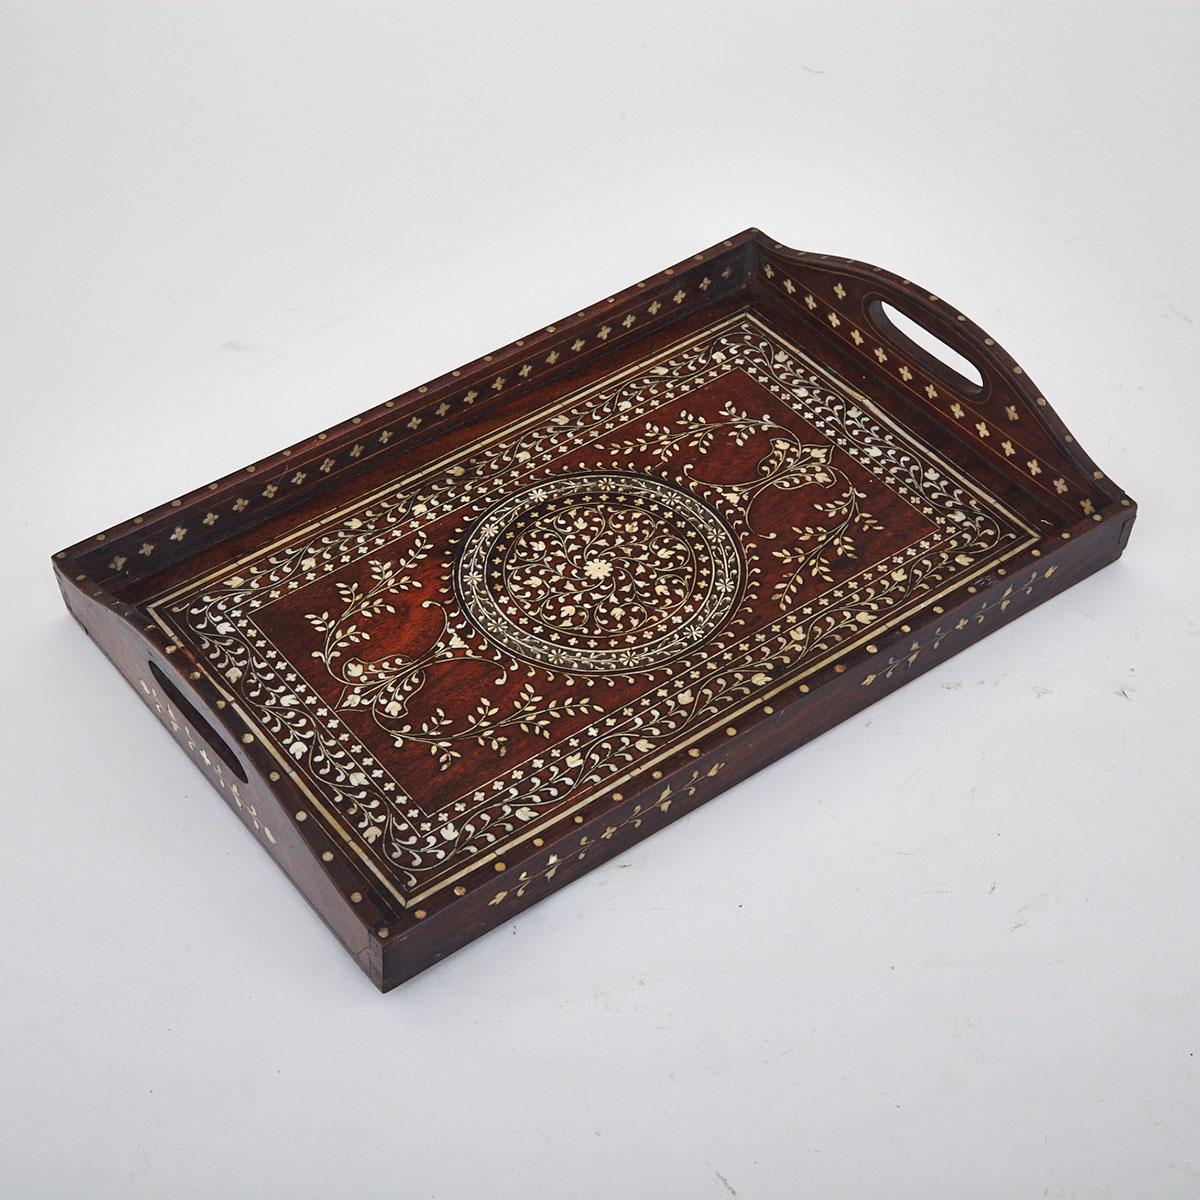 Anglo-Indian Bone Inlaid Hardwood Tray, early 20th century